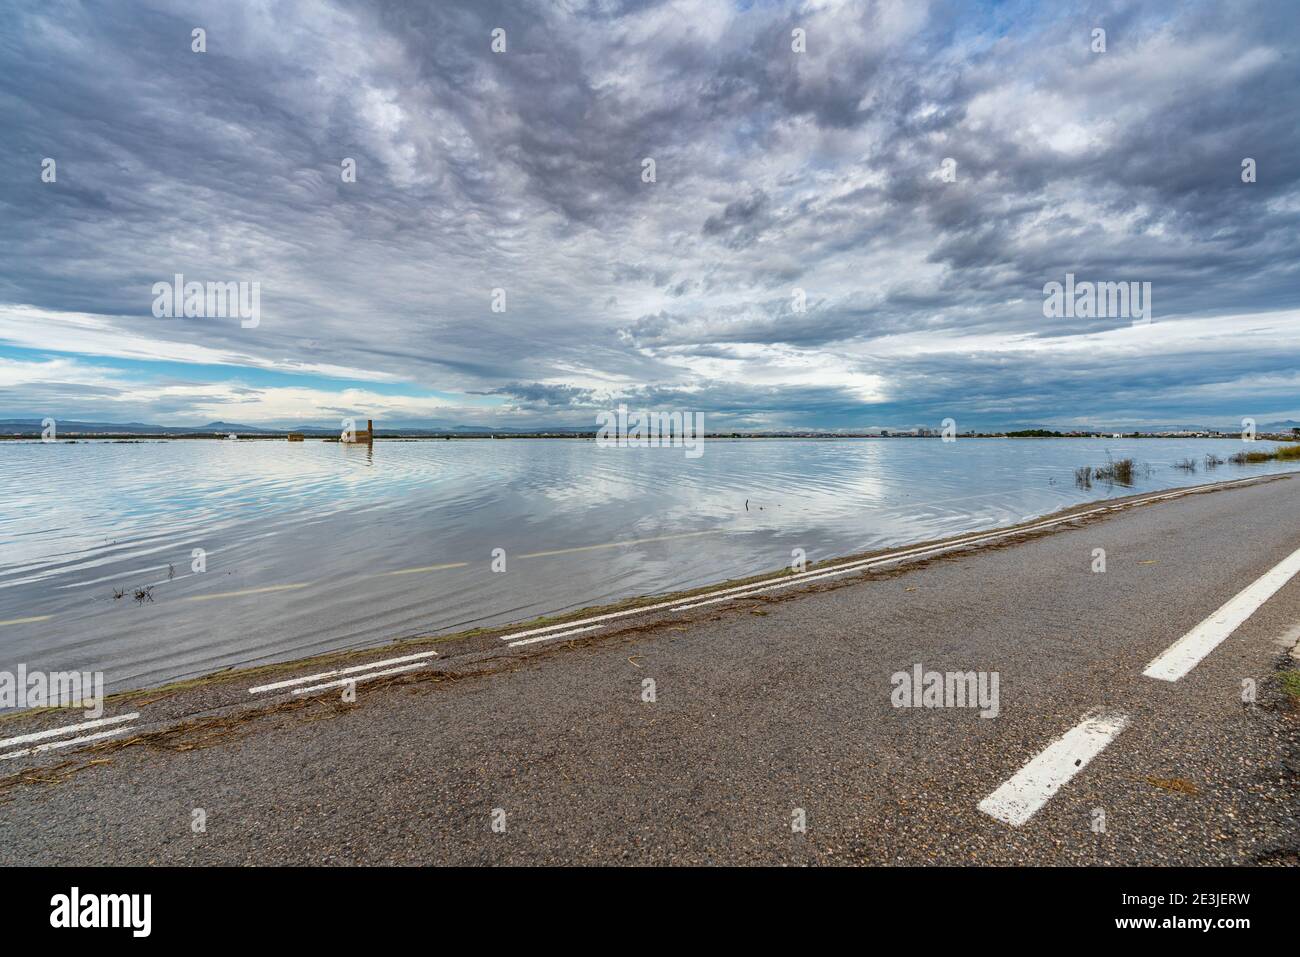 Flooded road under stormy and cloudy sky Stock Photo